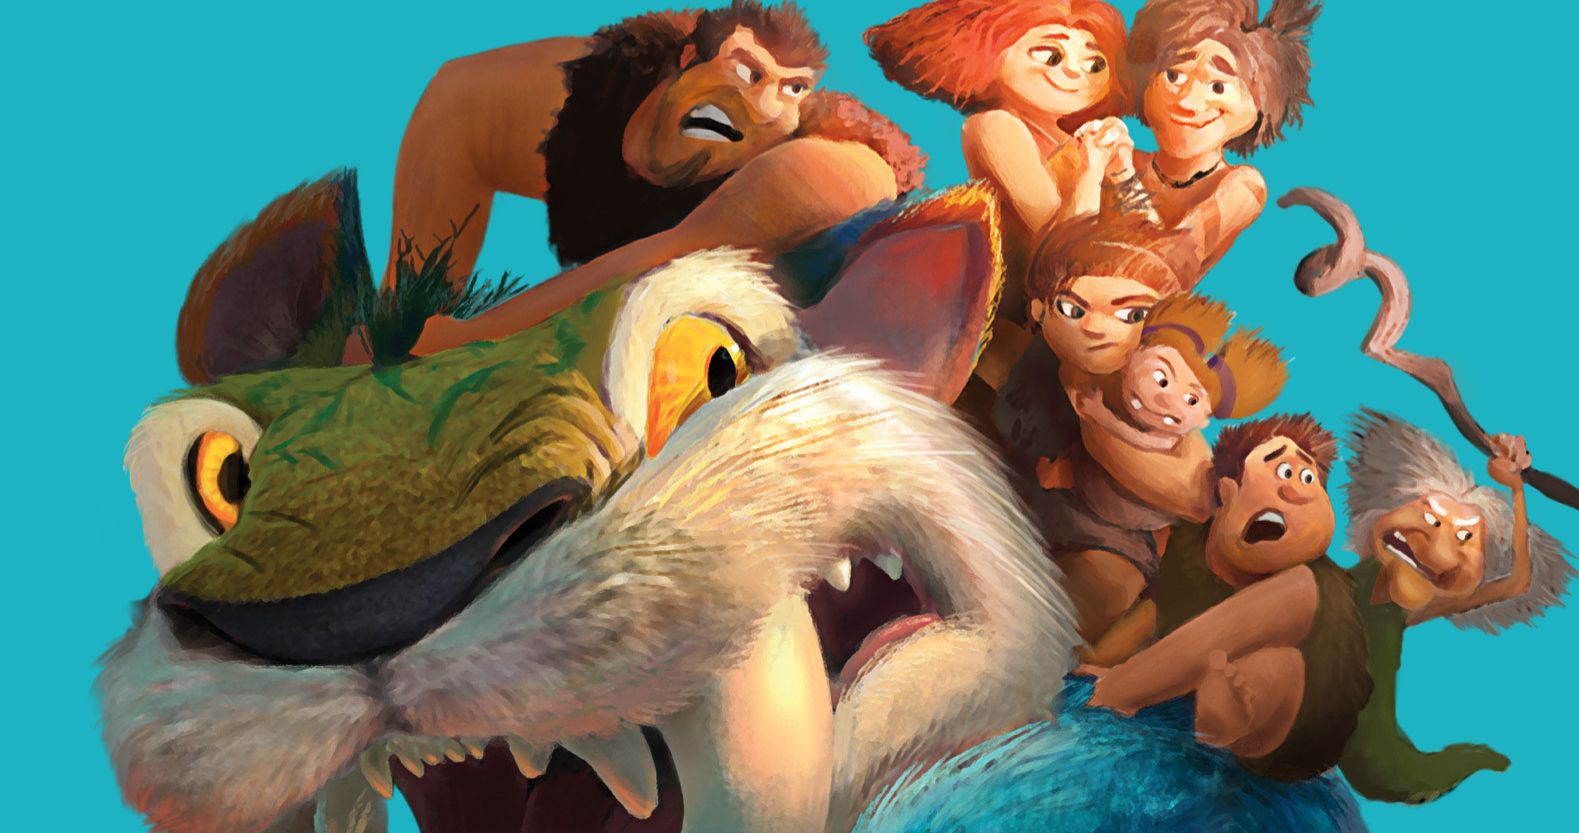 The Croods 2: A New Age Wins Second Weekend Box Office with $4.4M